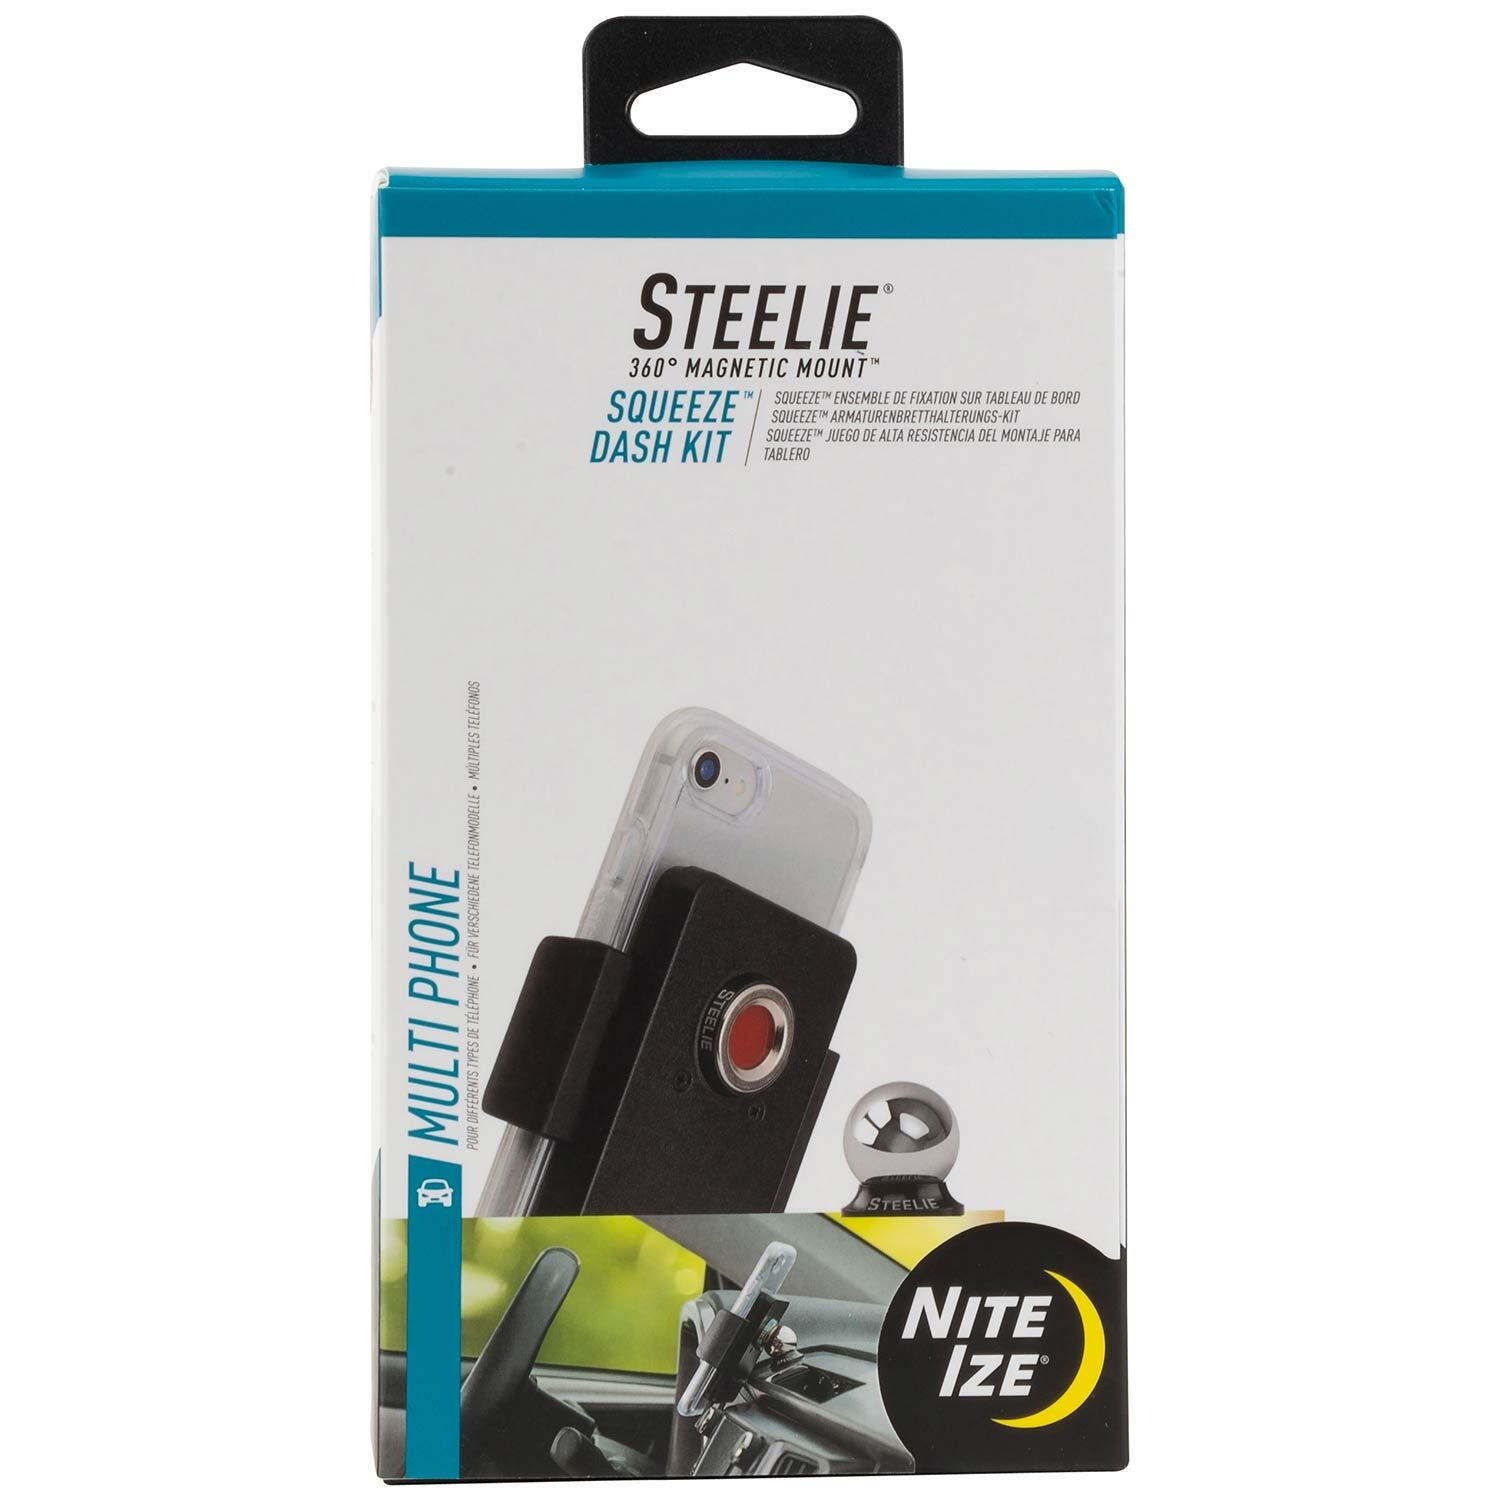 NITE IZE Steelie® Squeeze™ Cell Phone Dash Kit